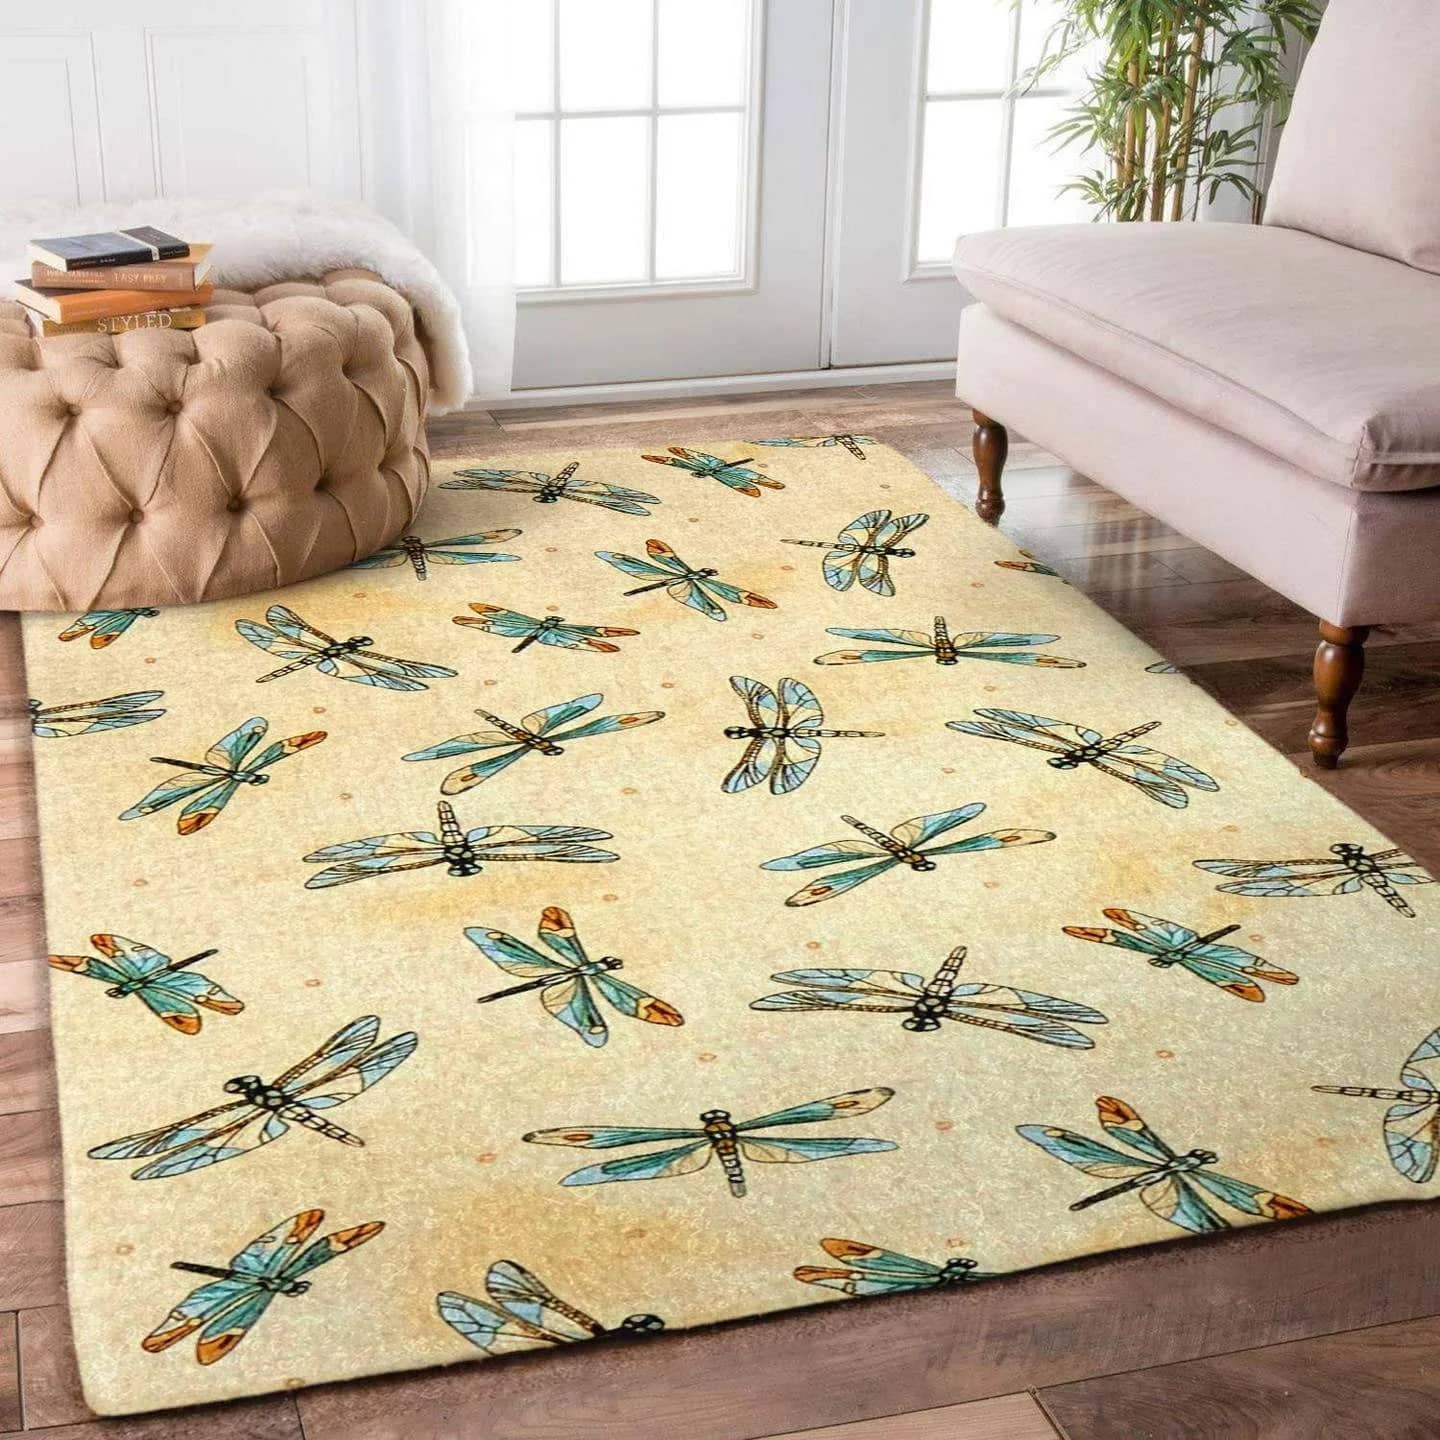 Dragonfly Limited Edition Amazon Best Seller Sku 262137 Rug